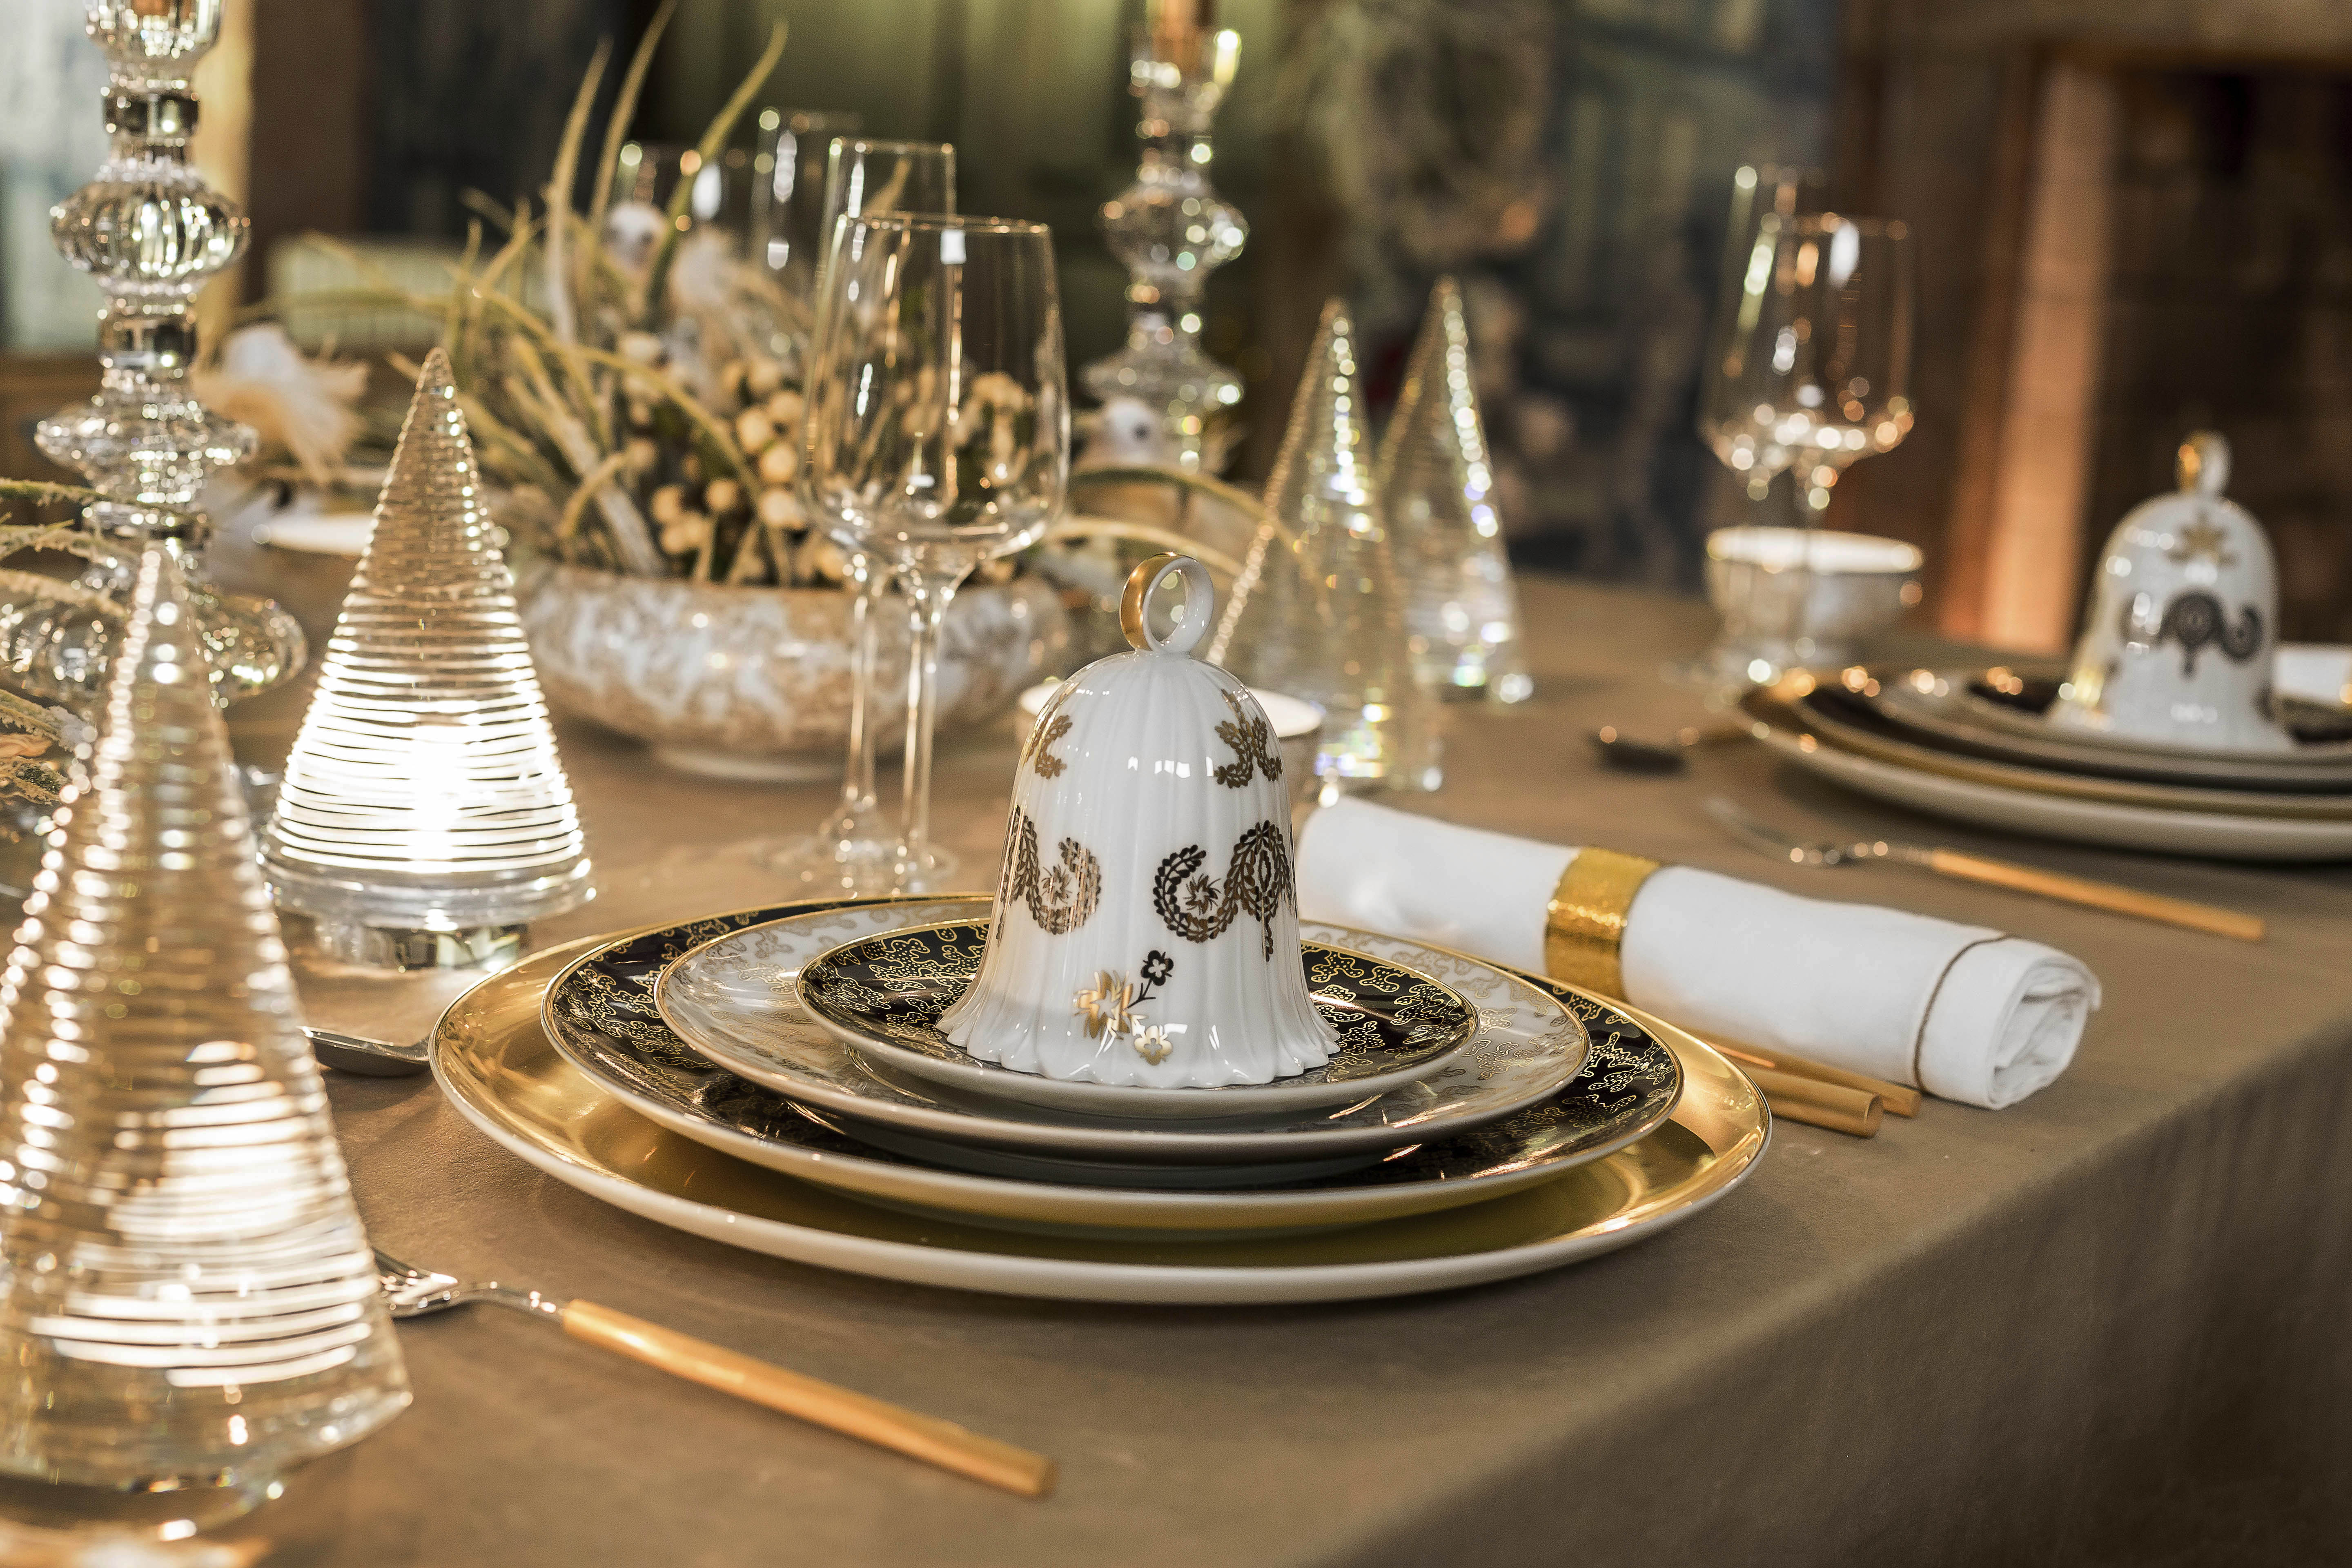 Decorate your Christmas table with Vista Alegre